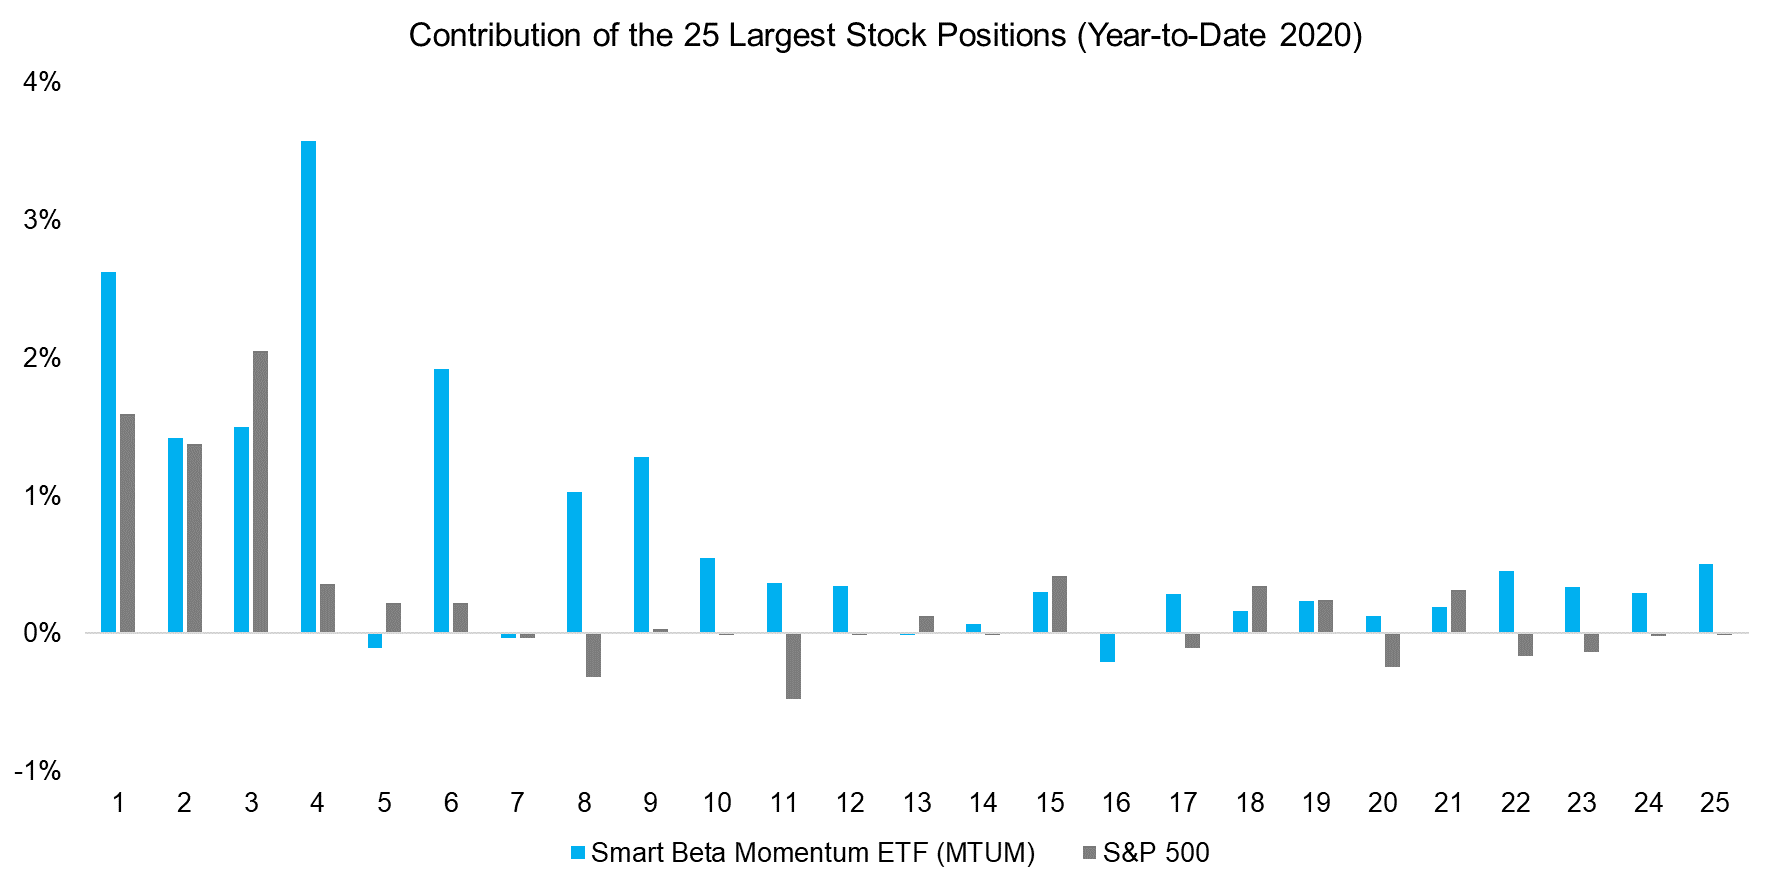 Contribution of the 25 Largest Stock Positions (Year-to-Date 2020)